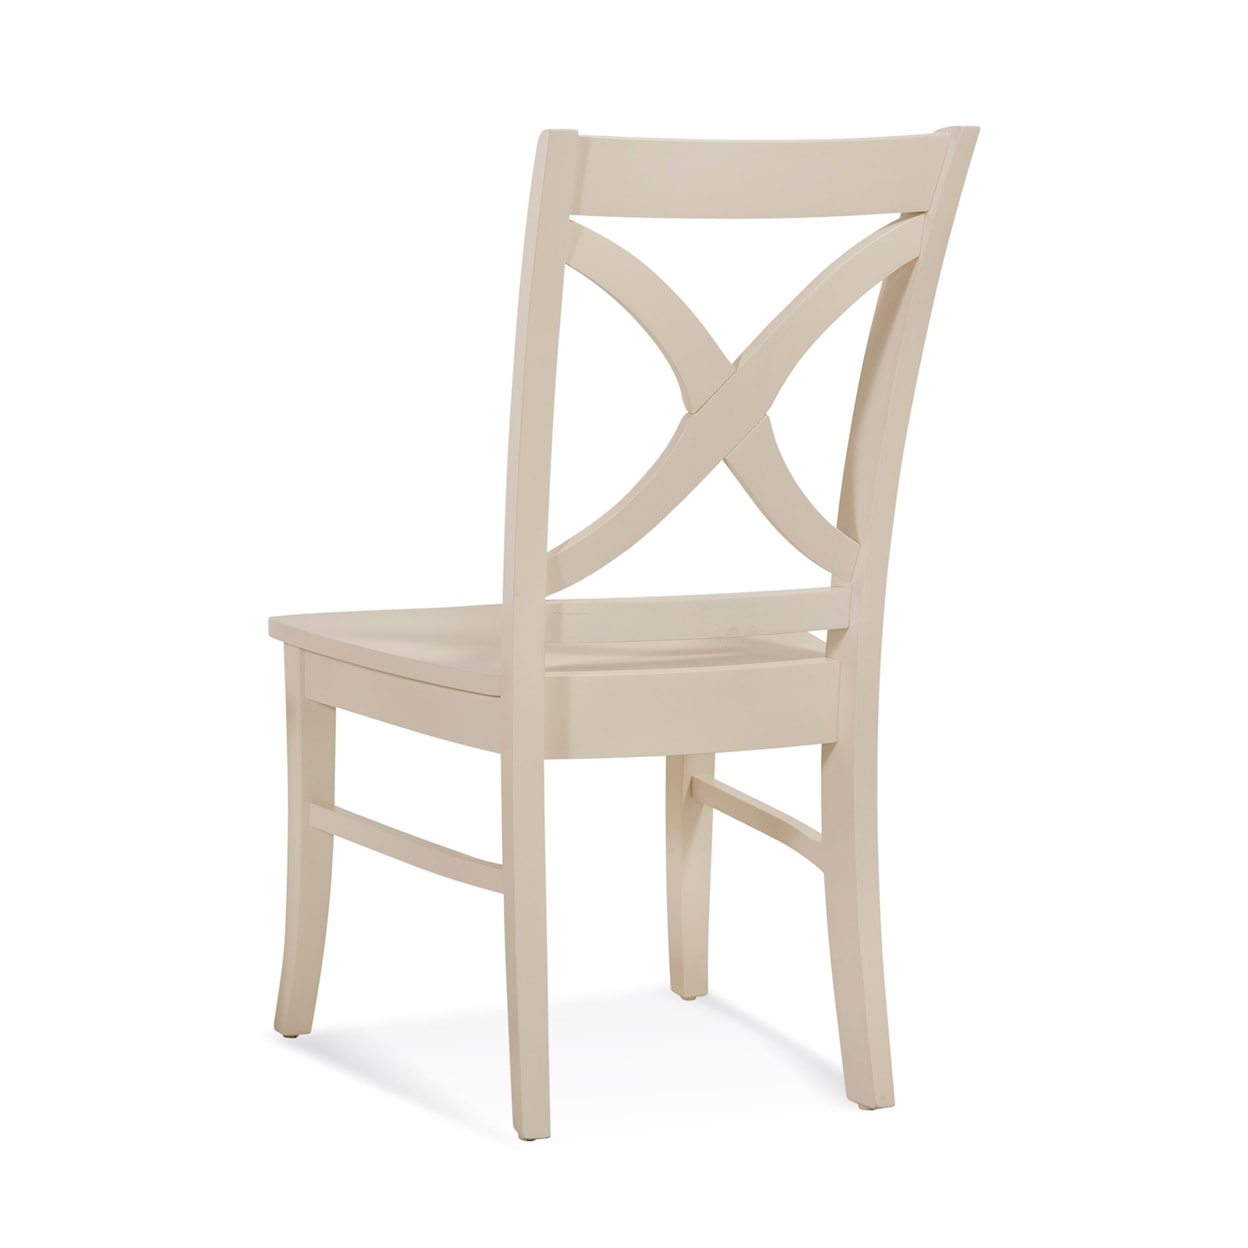 Braxton Culler Hues Hues Dining Side Chair with Wood Seat